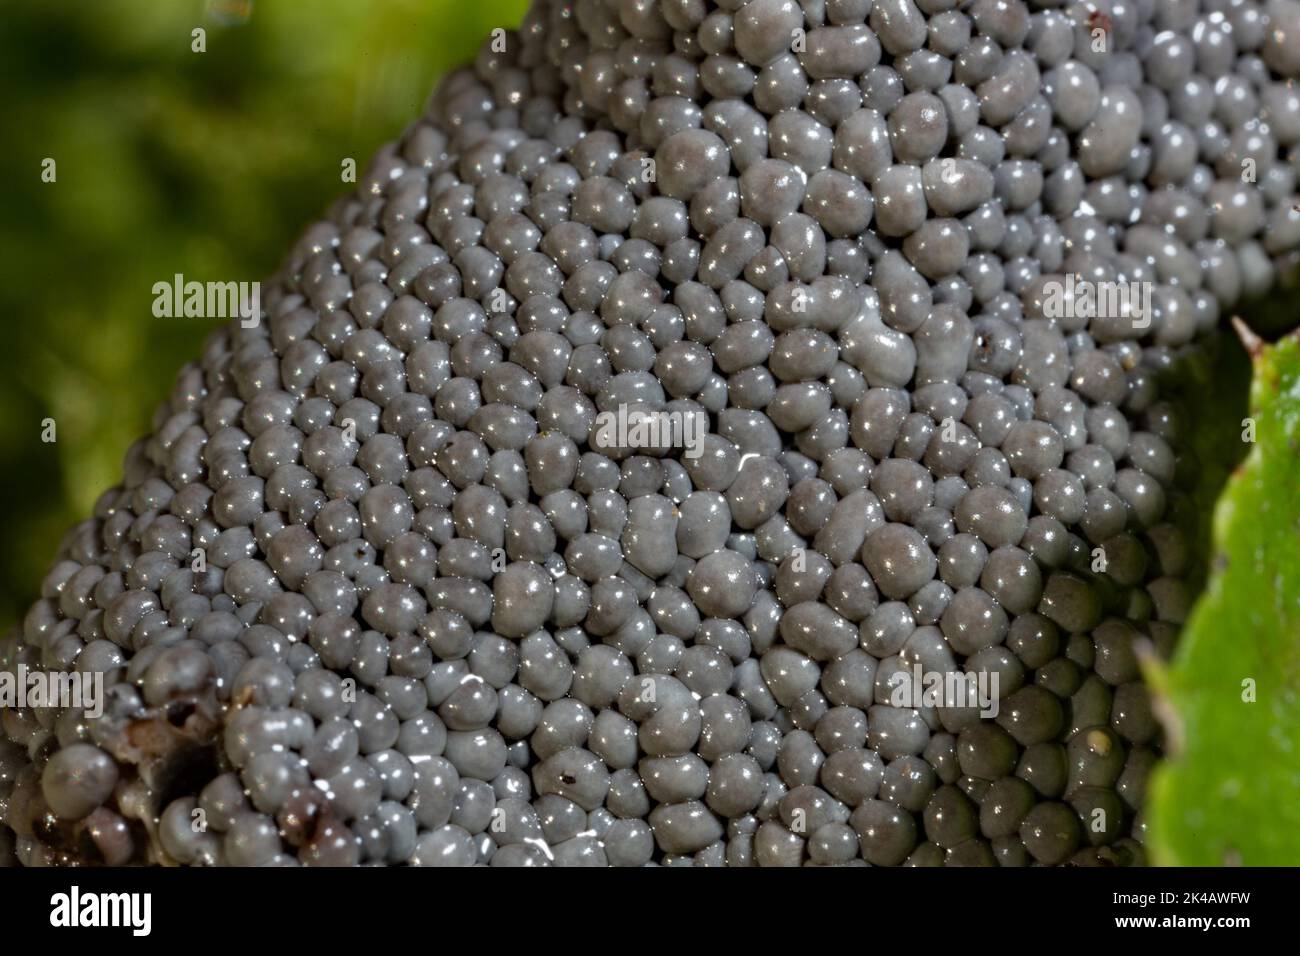 Grey grass slime mould fruiting body many ashy grey spherical fruiting bodies Stock Photo